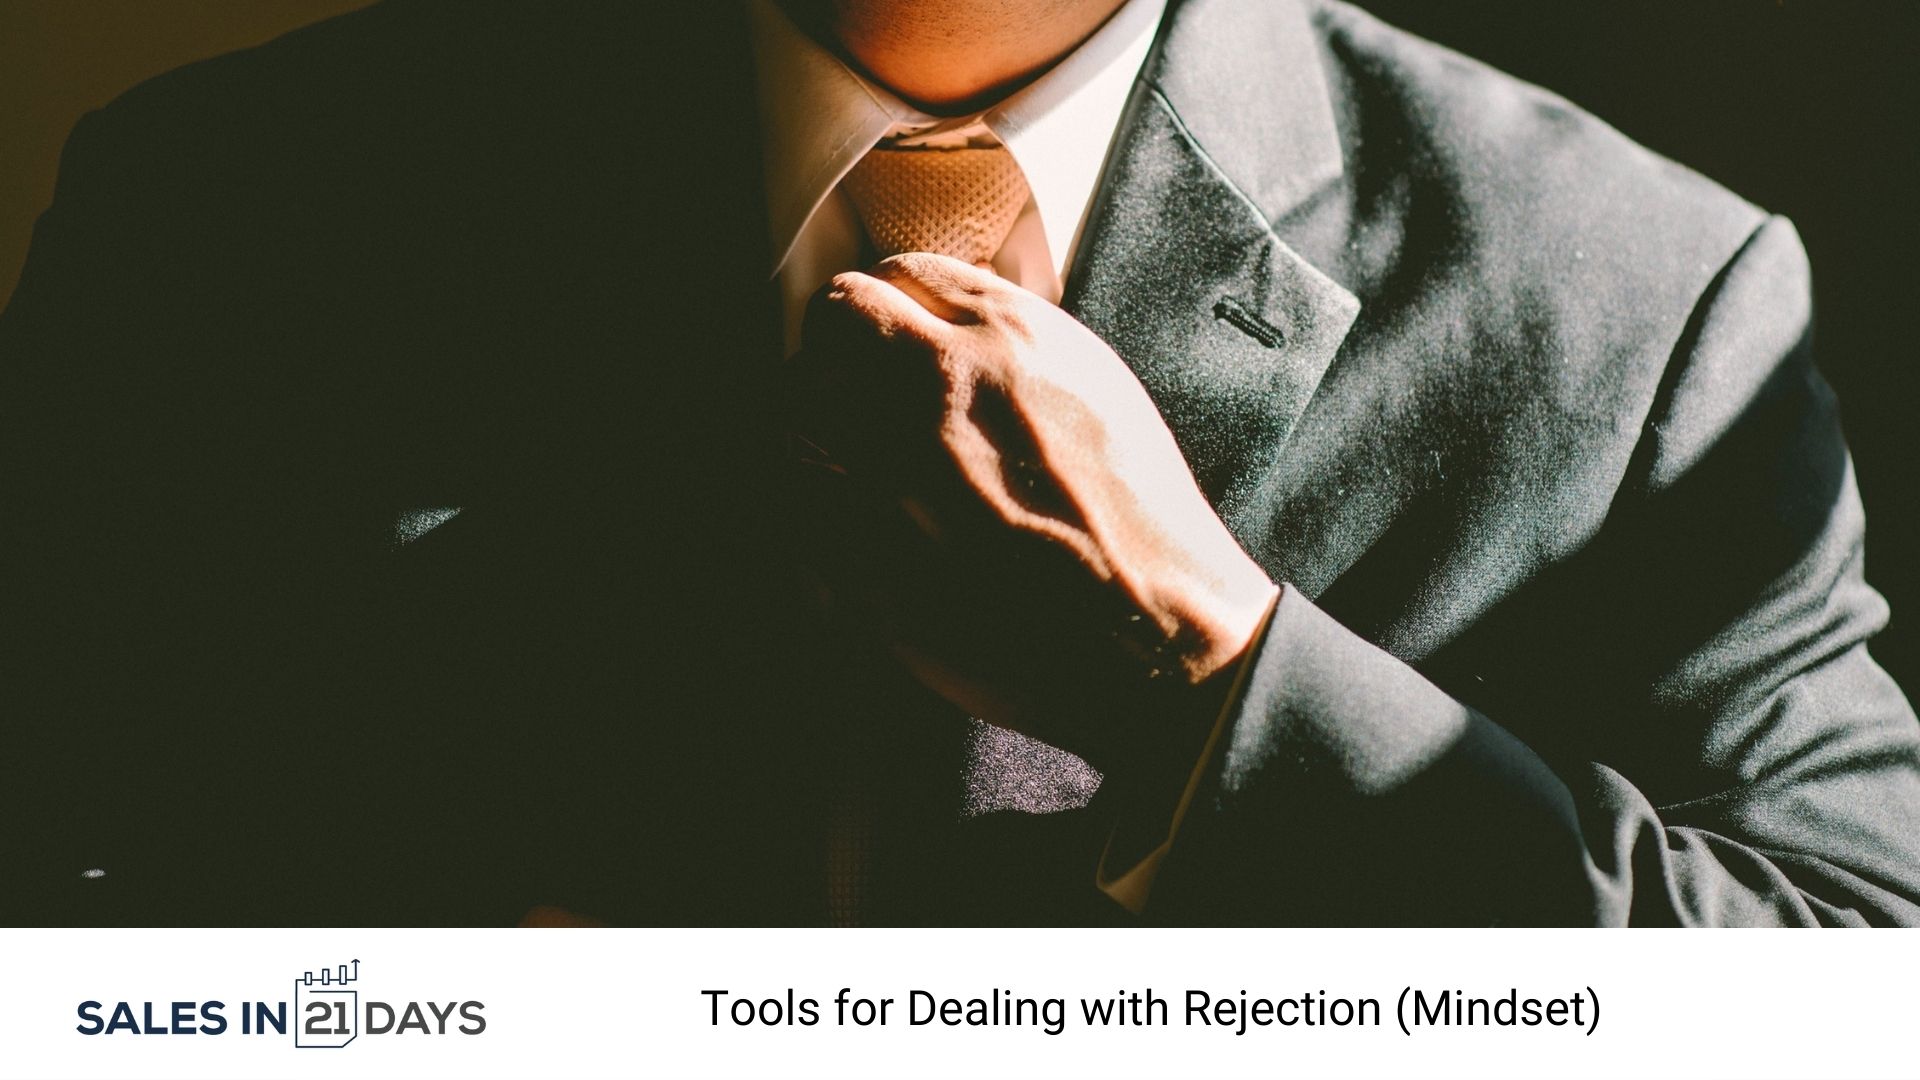 Tools for Dealing with Rejection Sales In 21 Days